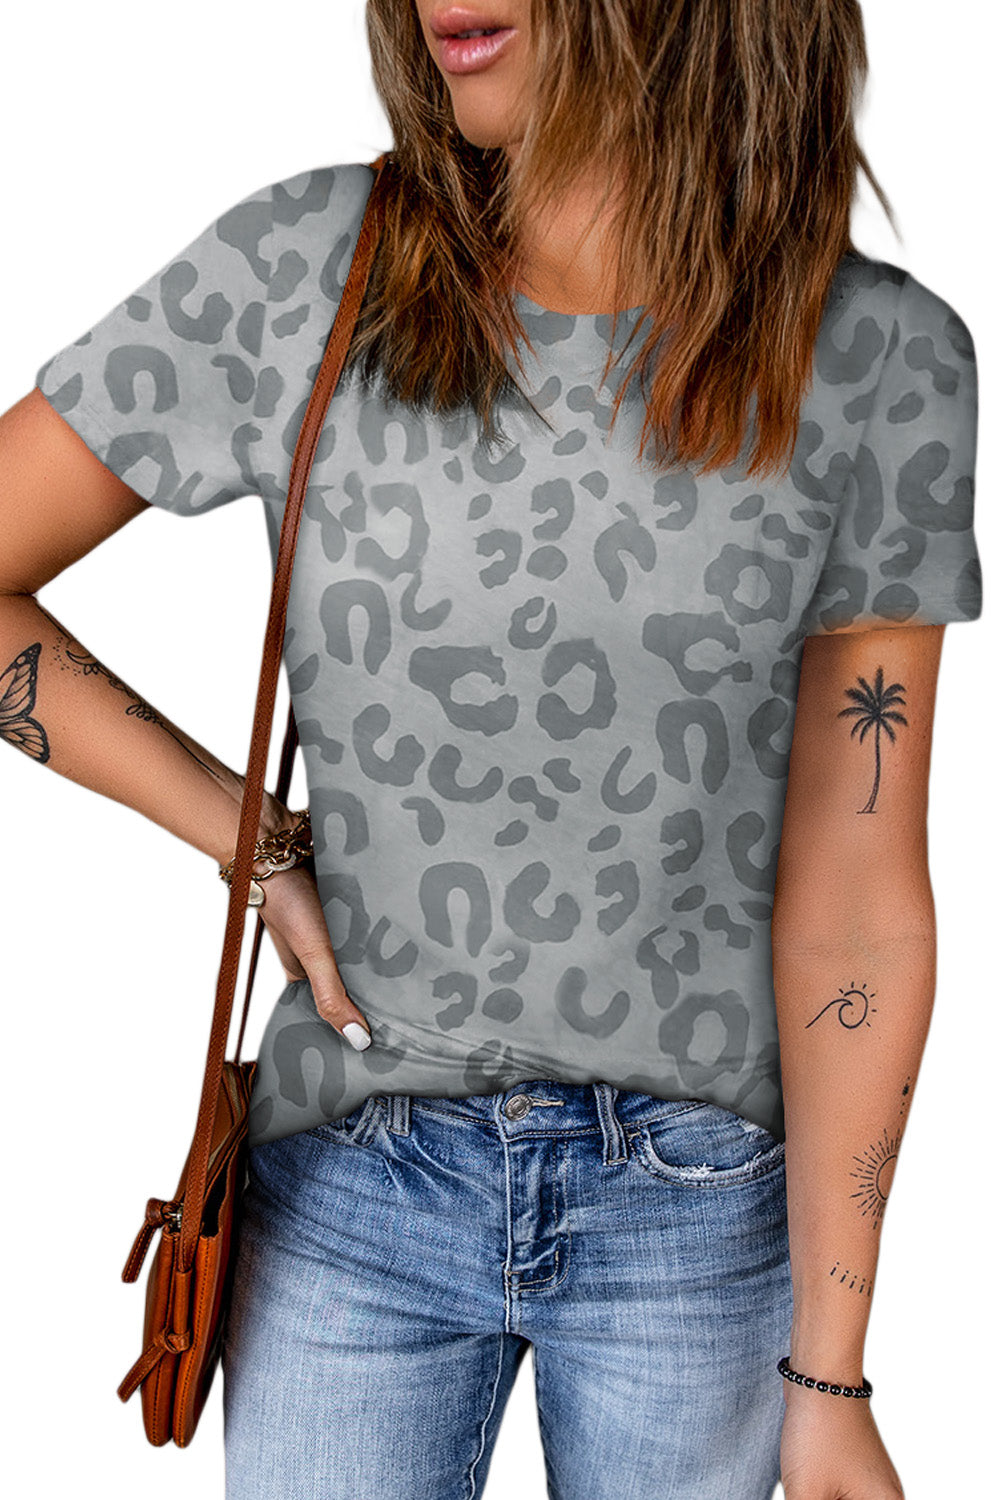 Leopard Round Neck Tee - Kawaii Stop - Chic Style, Comfortable, Easy Care, Everyday Wear, Fierce Fashion, Glamorous Look, Leopard Round Neck Tee, No Sheer, Ship From Overseas, Size Guide, Stylish Apparel, SYNZ, T-Shirt, T-Shirts, Tee, Trendy Print, Wild Side, Women's Clothing, Women's Top